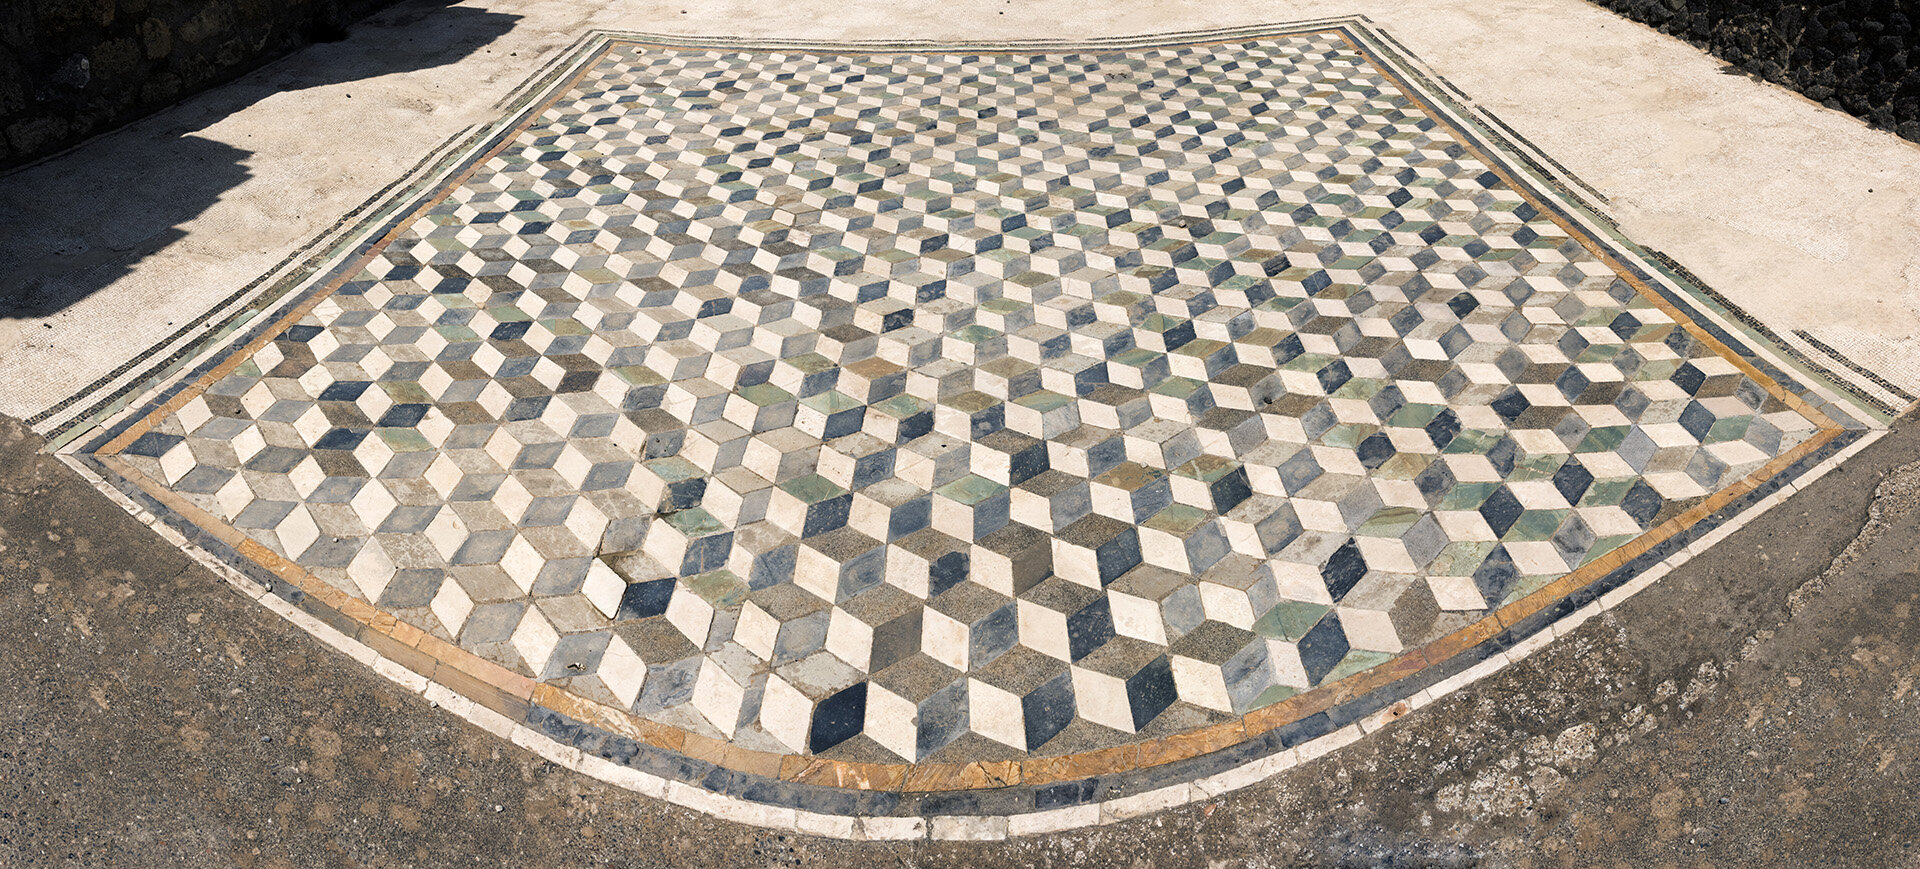 Multicolored Floor Mosaic (House of the Faun): Pompeii, Italy, 18"x32", photograph, 2017